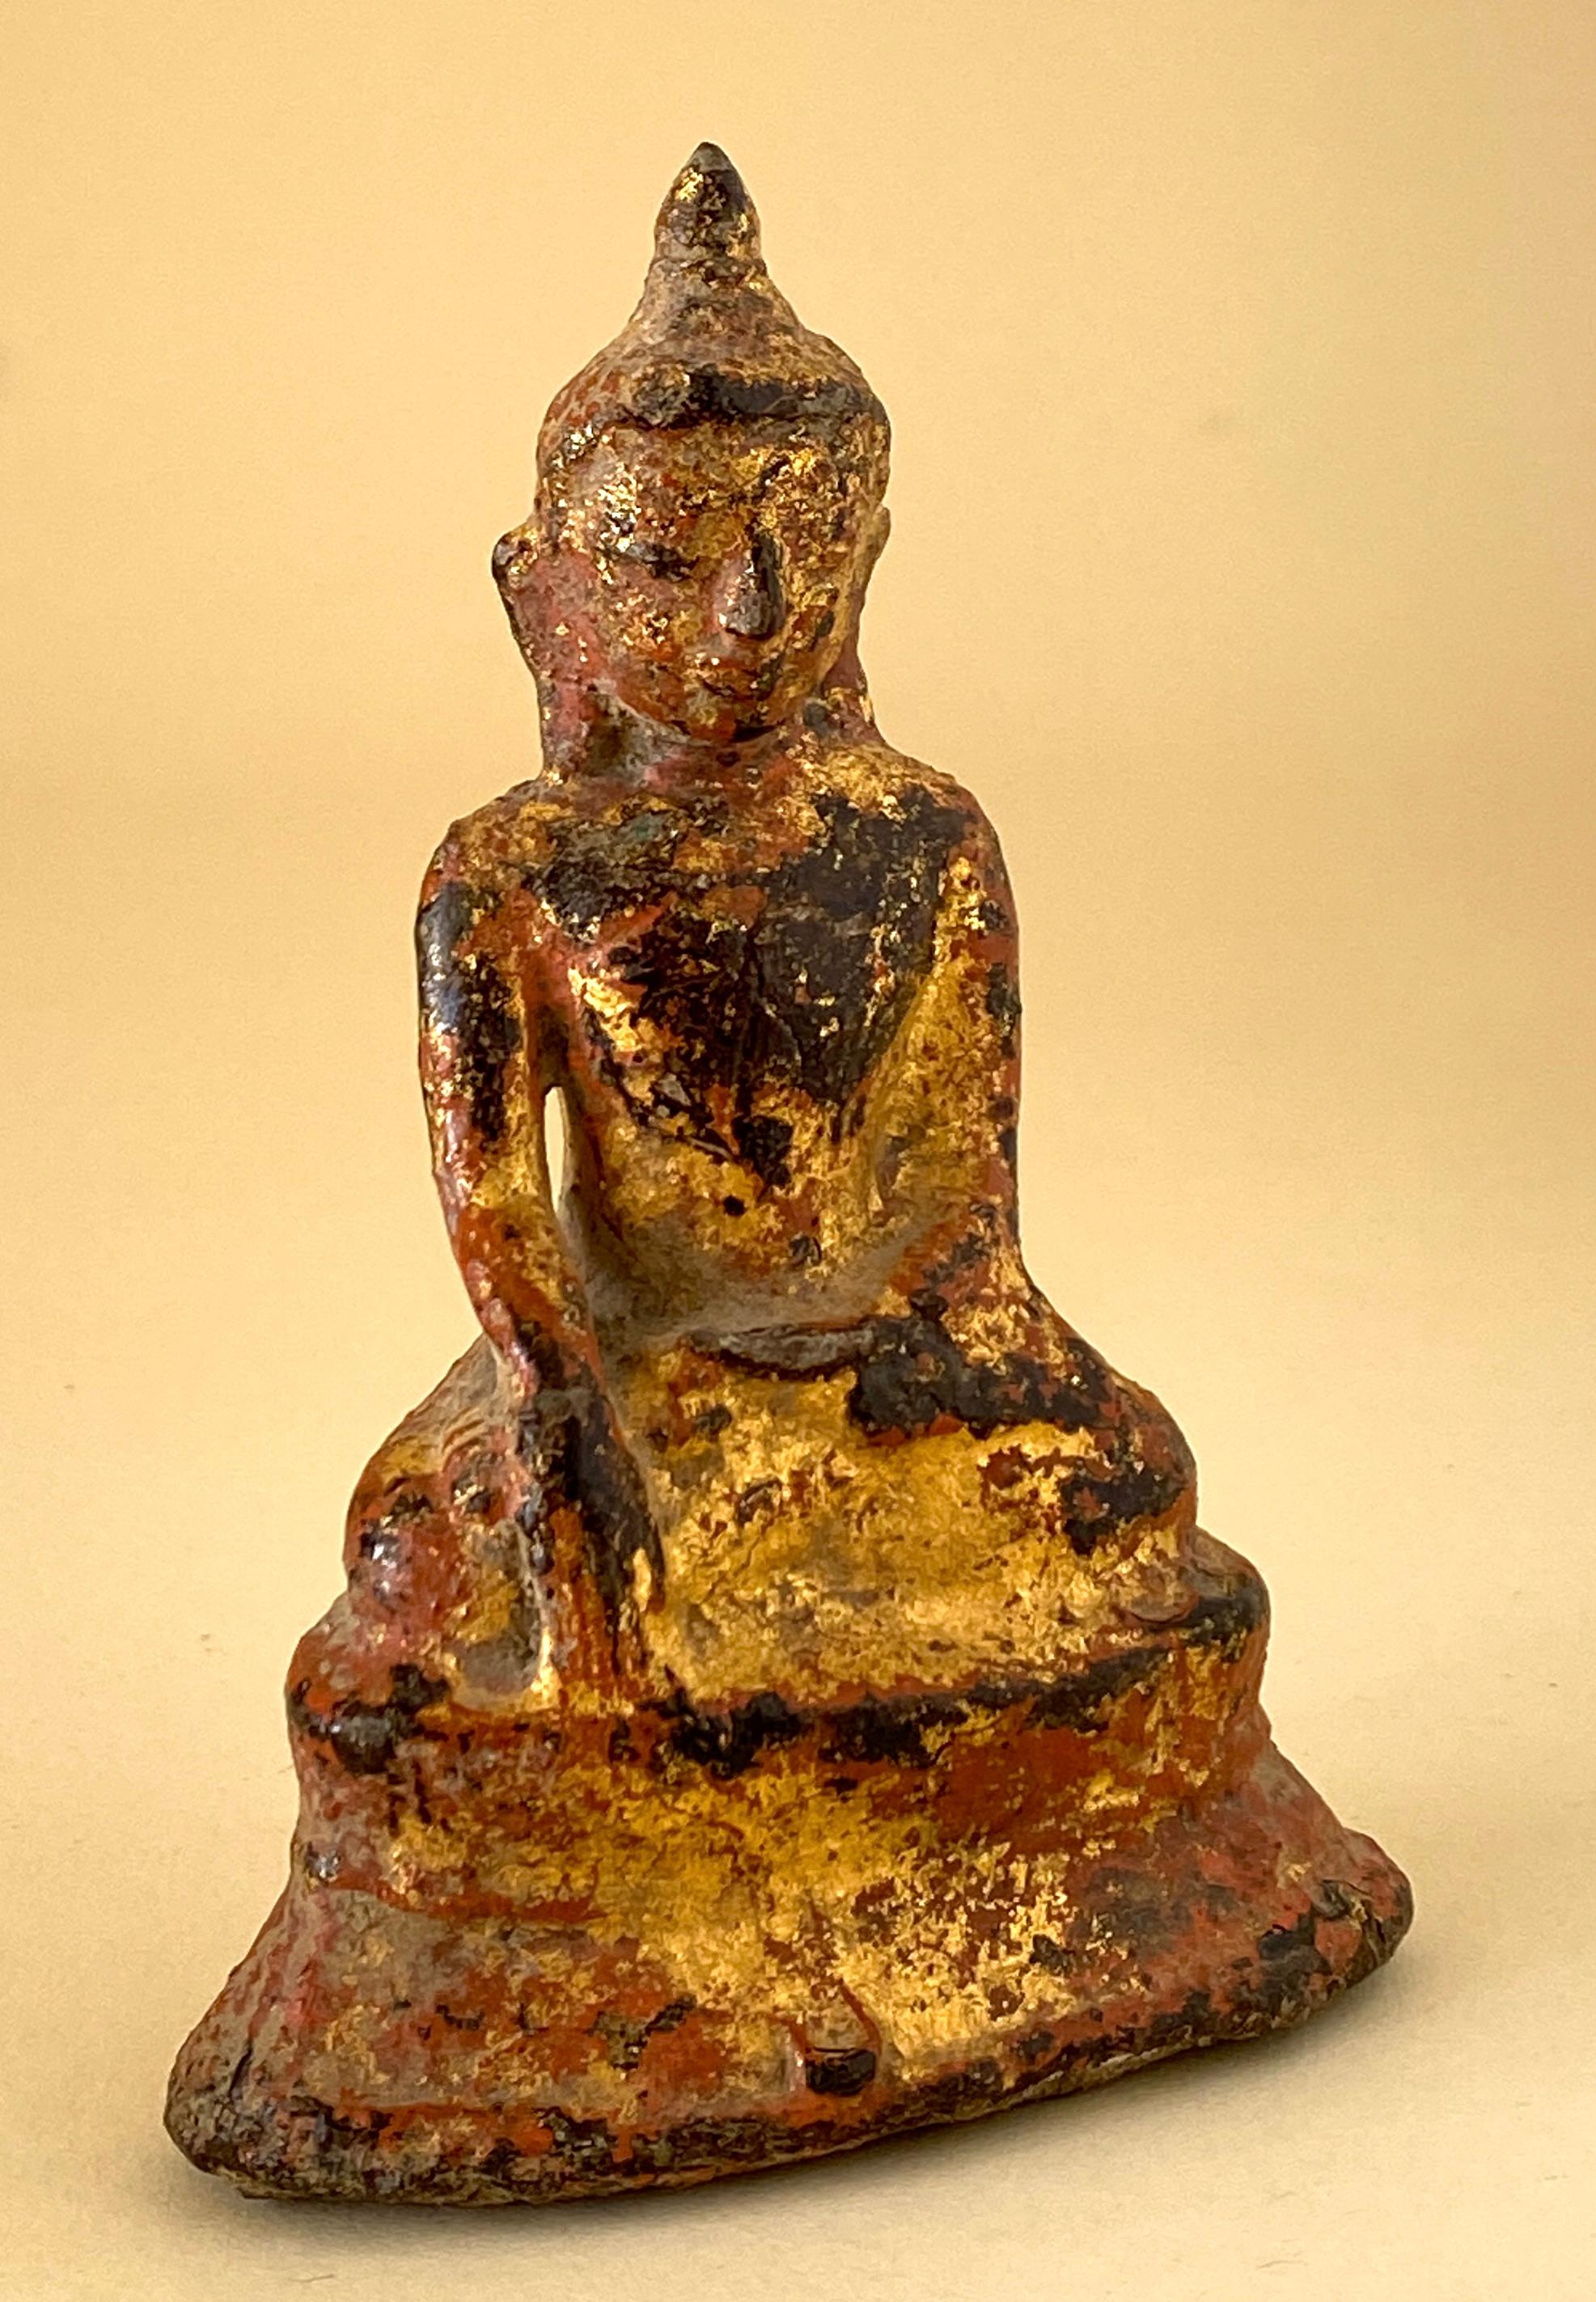 Store closing March 31. A small but monumental bronze with layered patina of gilt and paint or lacquer. Some red color appears on the piece, not sure what it is, maybe a paint or lacquer. The Buddha seated in Vajrasana with hands in Bhumisparsha